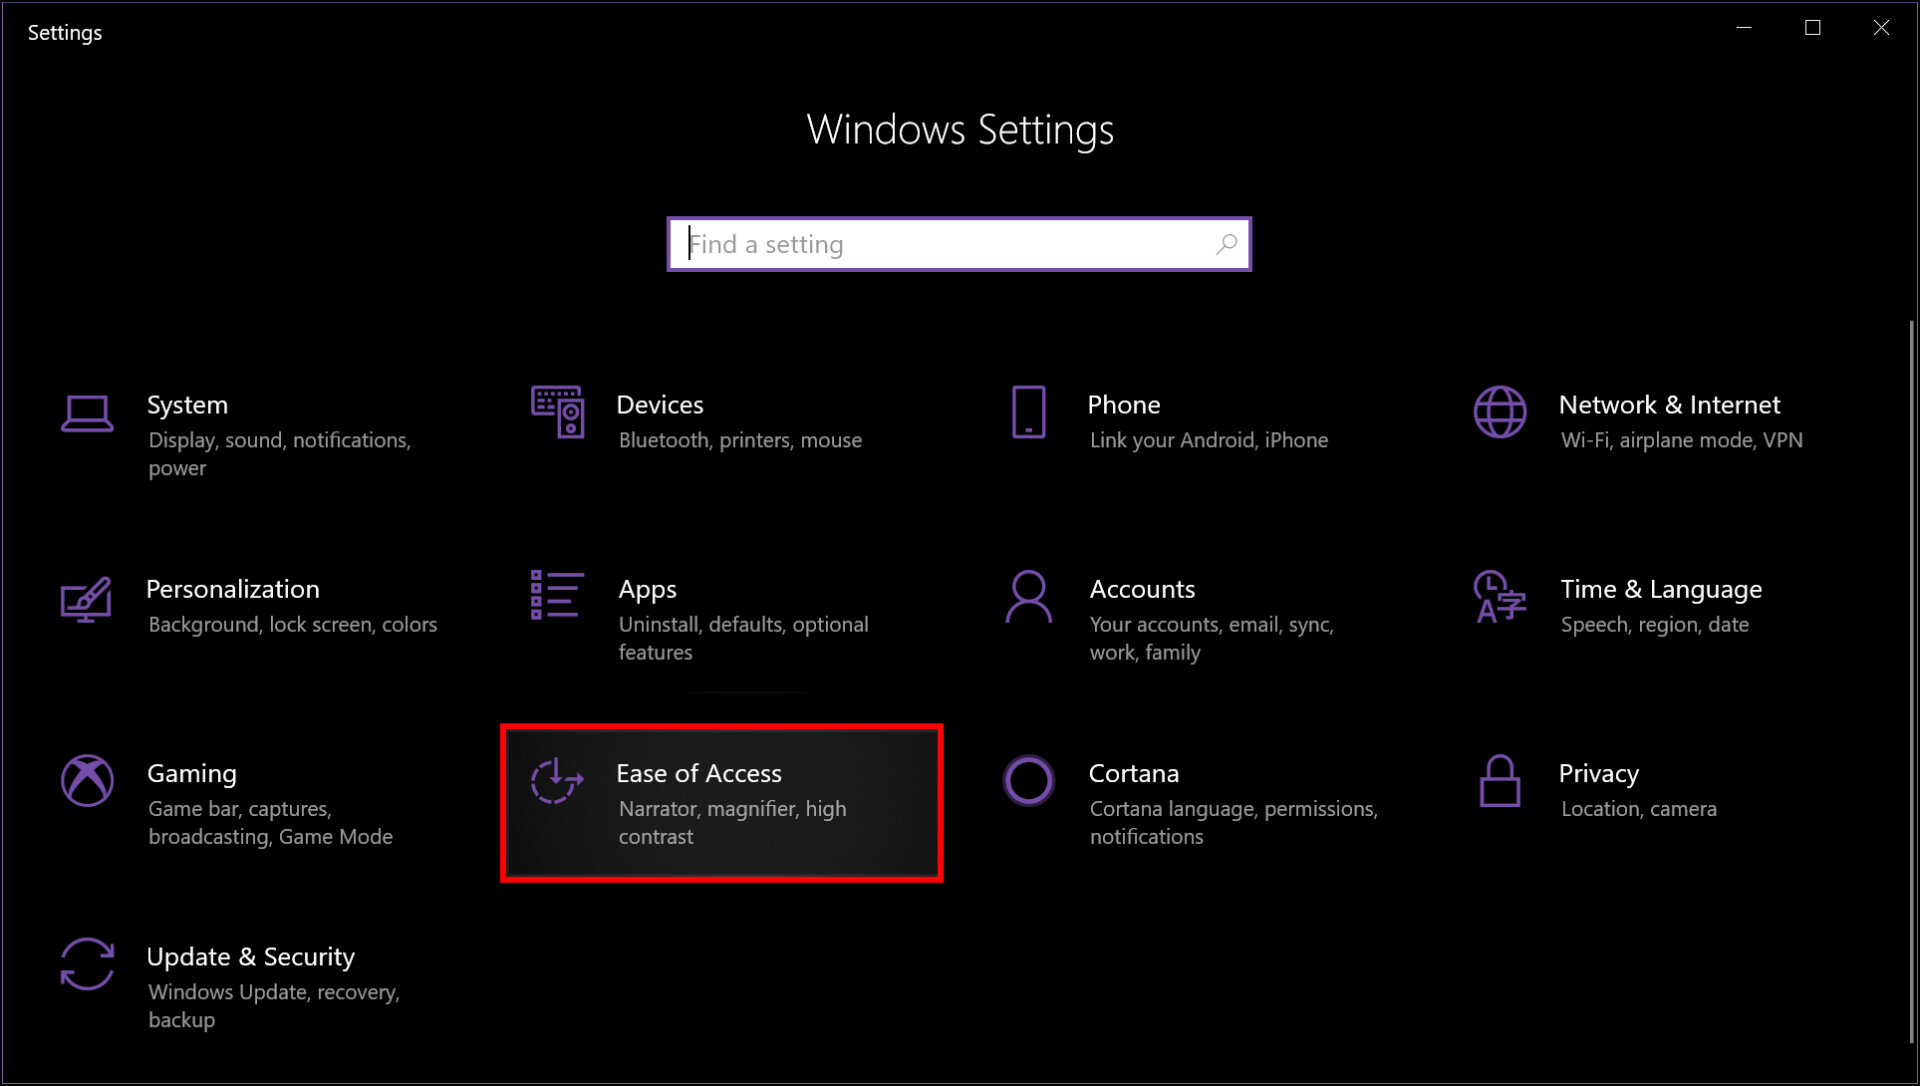 Windows 10 Ease of access - How to use notifications in Windows 10